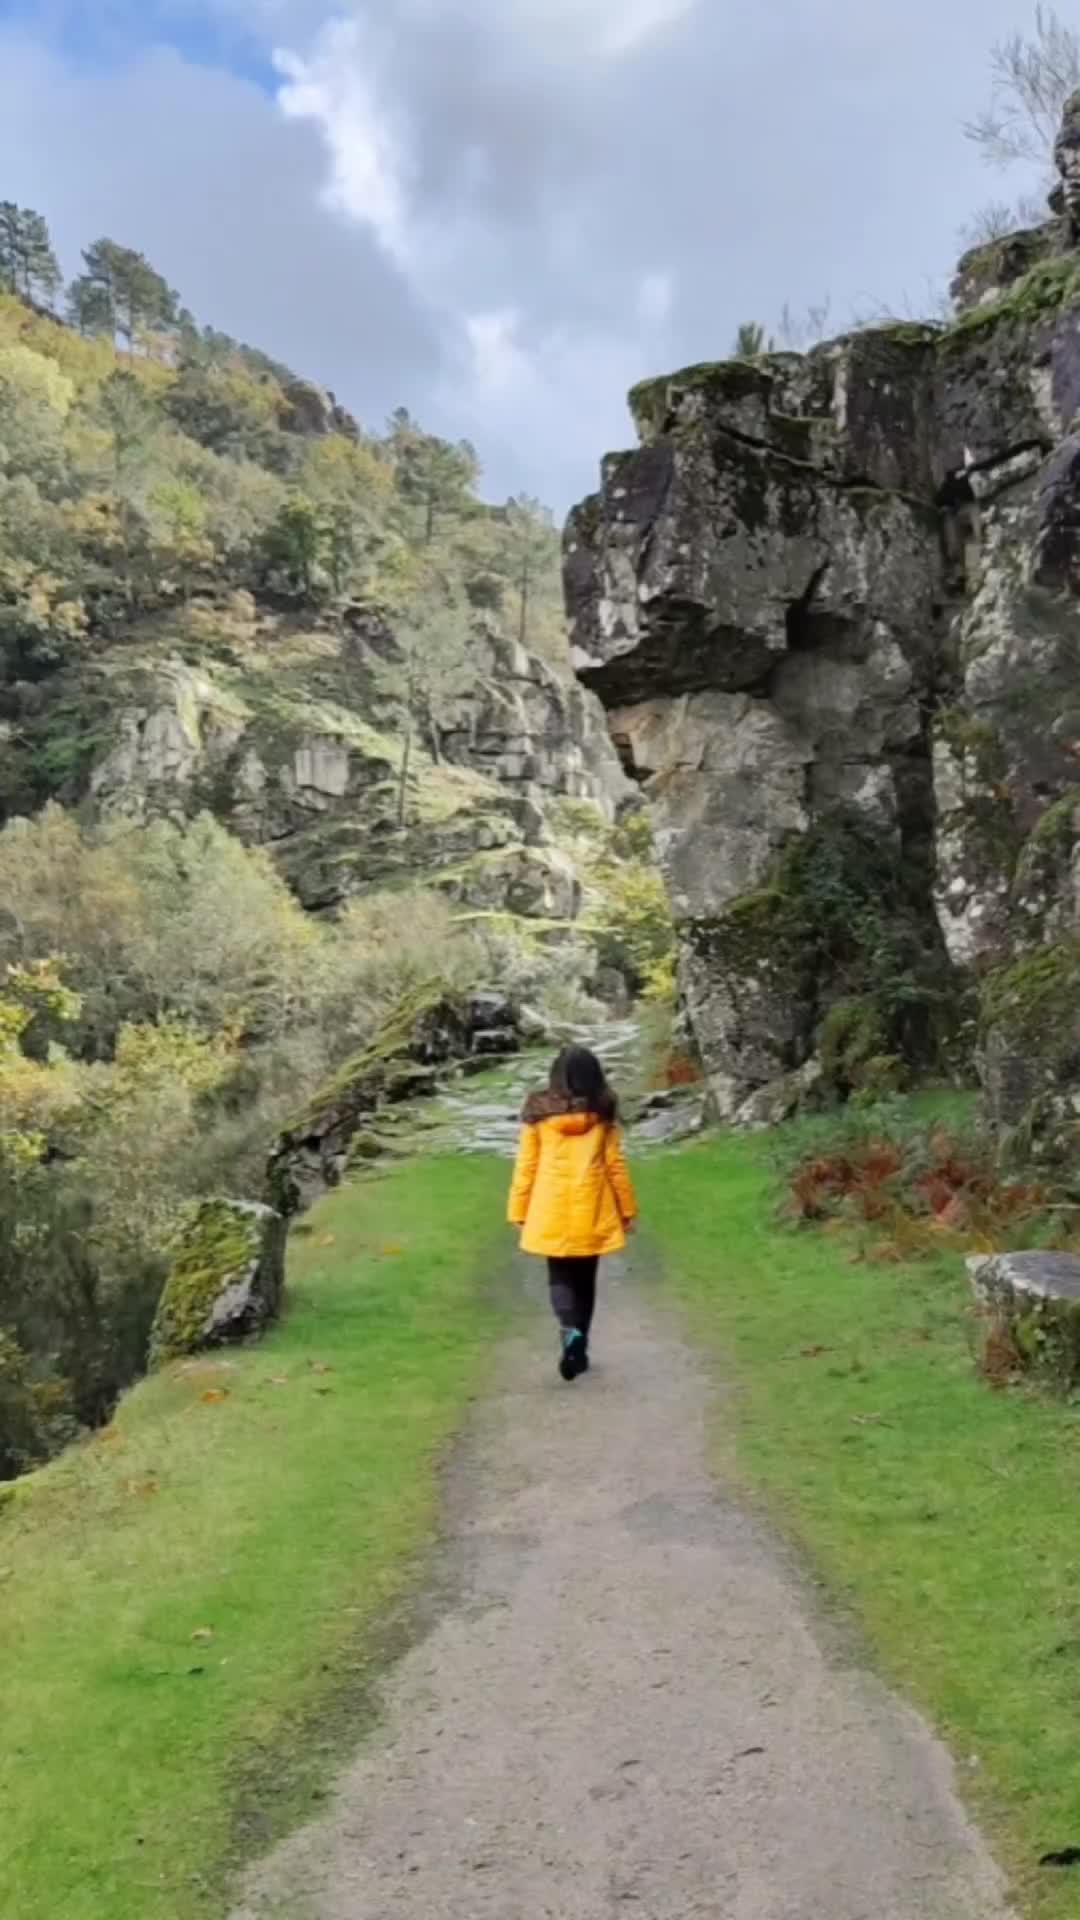 There's no such thing as bad weather 🌧️❄️🌦️💨
Just wear the right clothes and go exploring 🥾

📍Ponte de Misarela | Diabo

*
*

#pontedemisarela #devilsbridge #visitportugal #minho #norteportugal #geres #portugal #sheisnotlost #nps #hikevibes #hikinggirl #neverstopexploring #autumsvibes #waterfall #thunderstorm #travelinspiration #travelbloguer